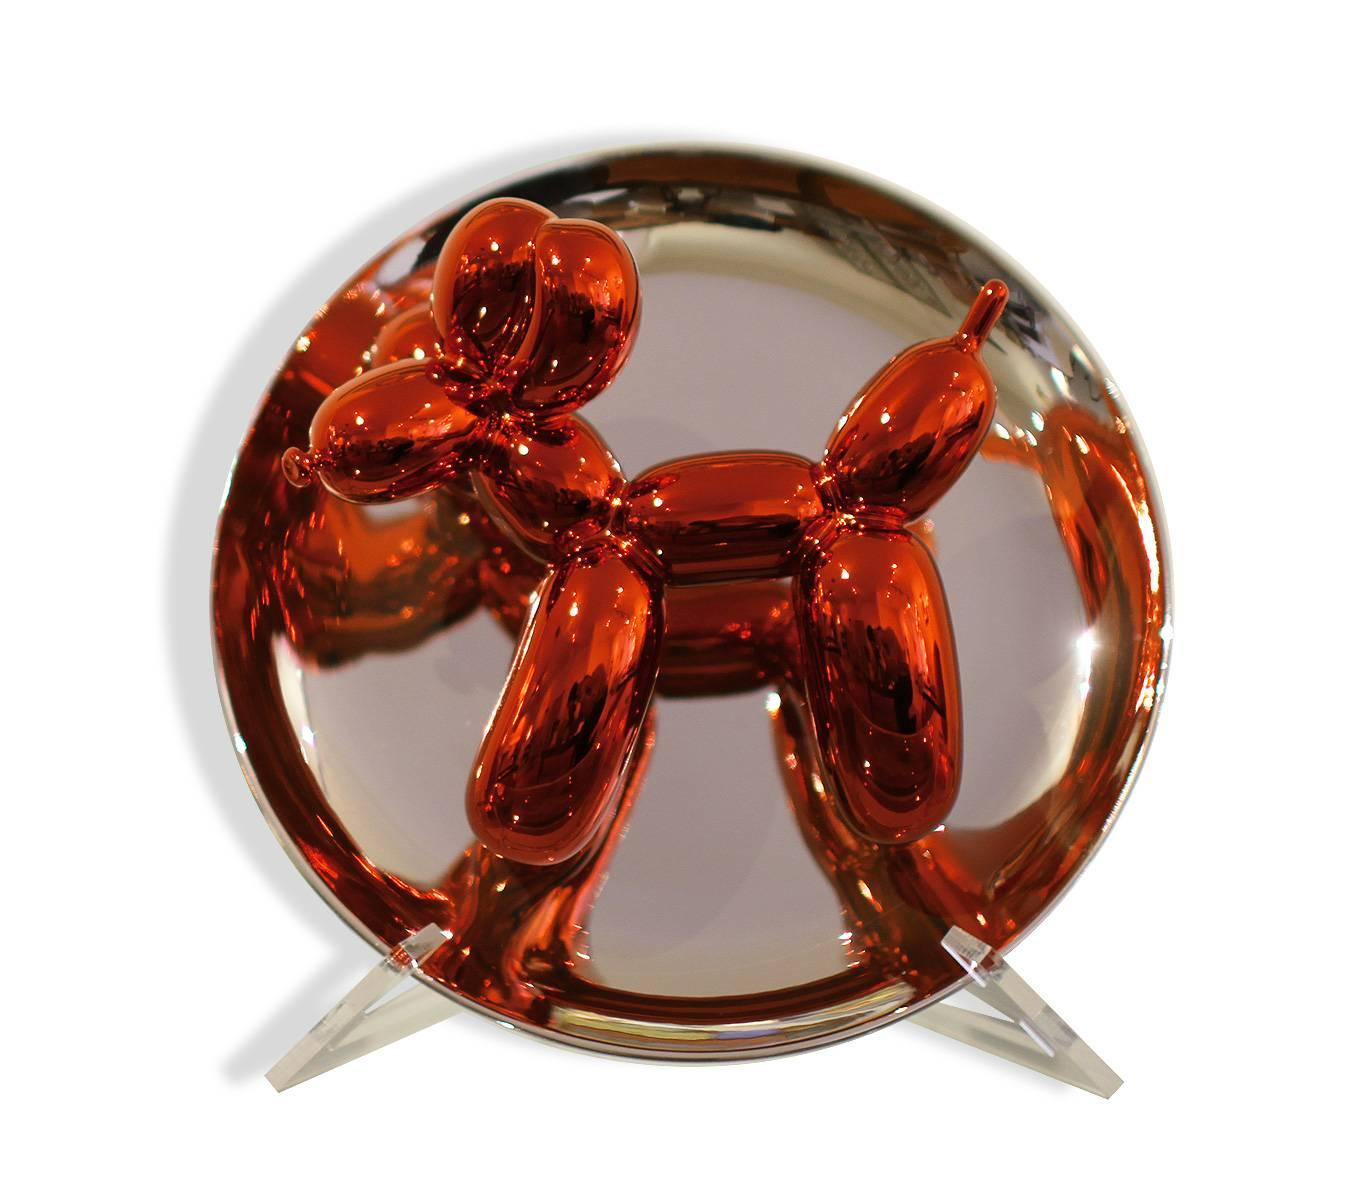 Jeff Koons

Balloon dog plate, red and silver lacquered

Limited edition. Fine porcelain with red reflective finish

Attached with label to backside, numbered and edited by Voice Los Angeles

Together with box and Lucite plate